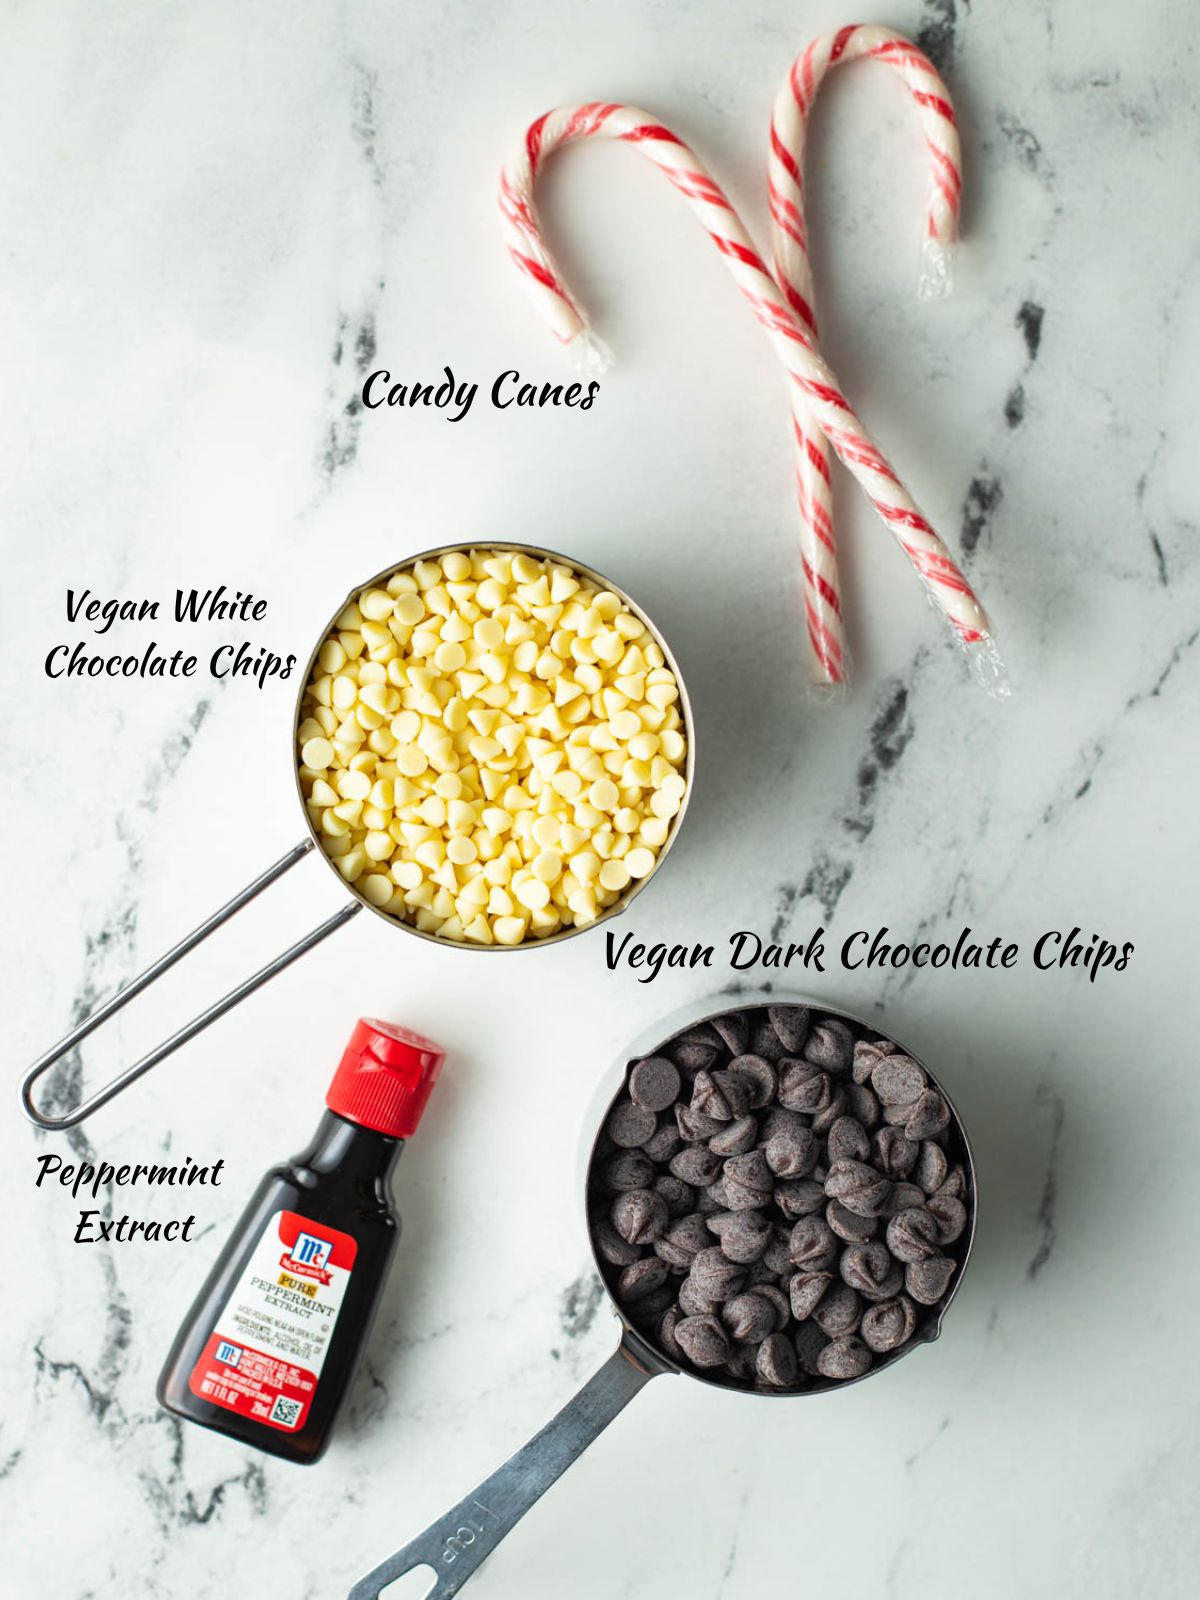 Two candy canes, a cup of white chocolate chips, a cup of dark chocolate chips, peppermint extract.
